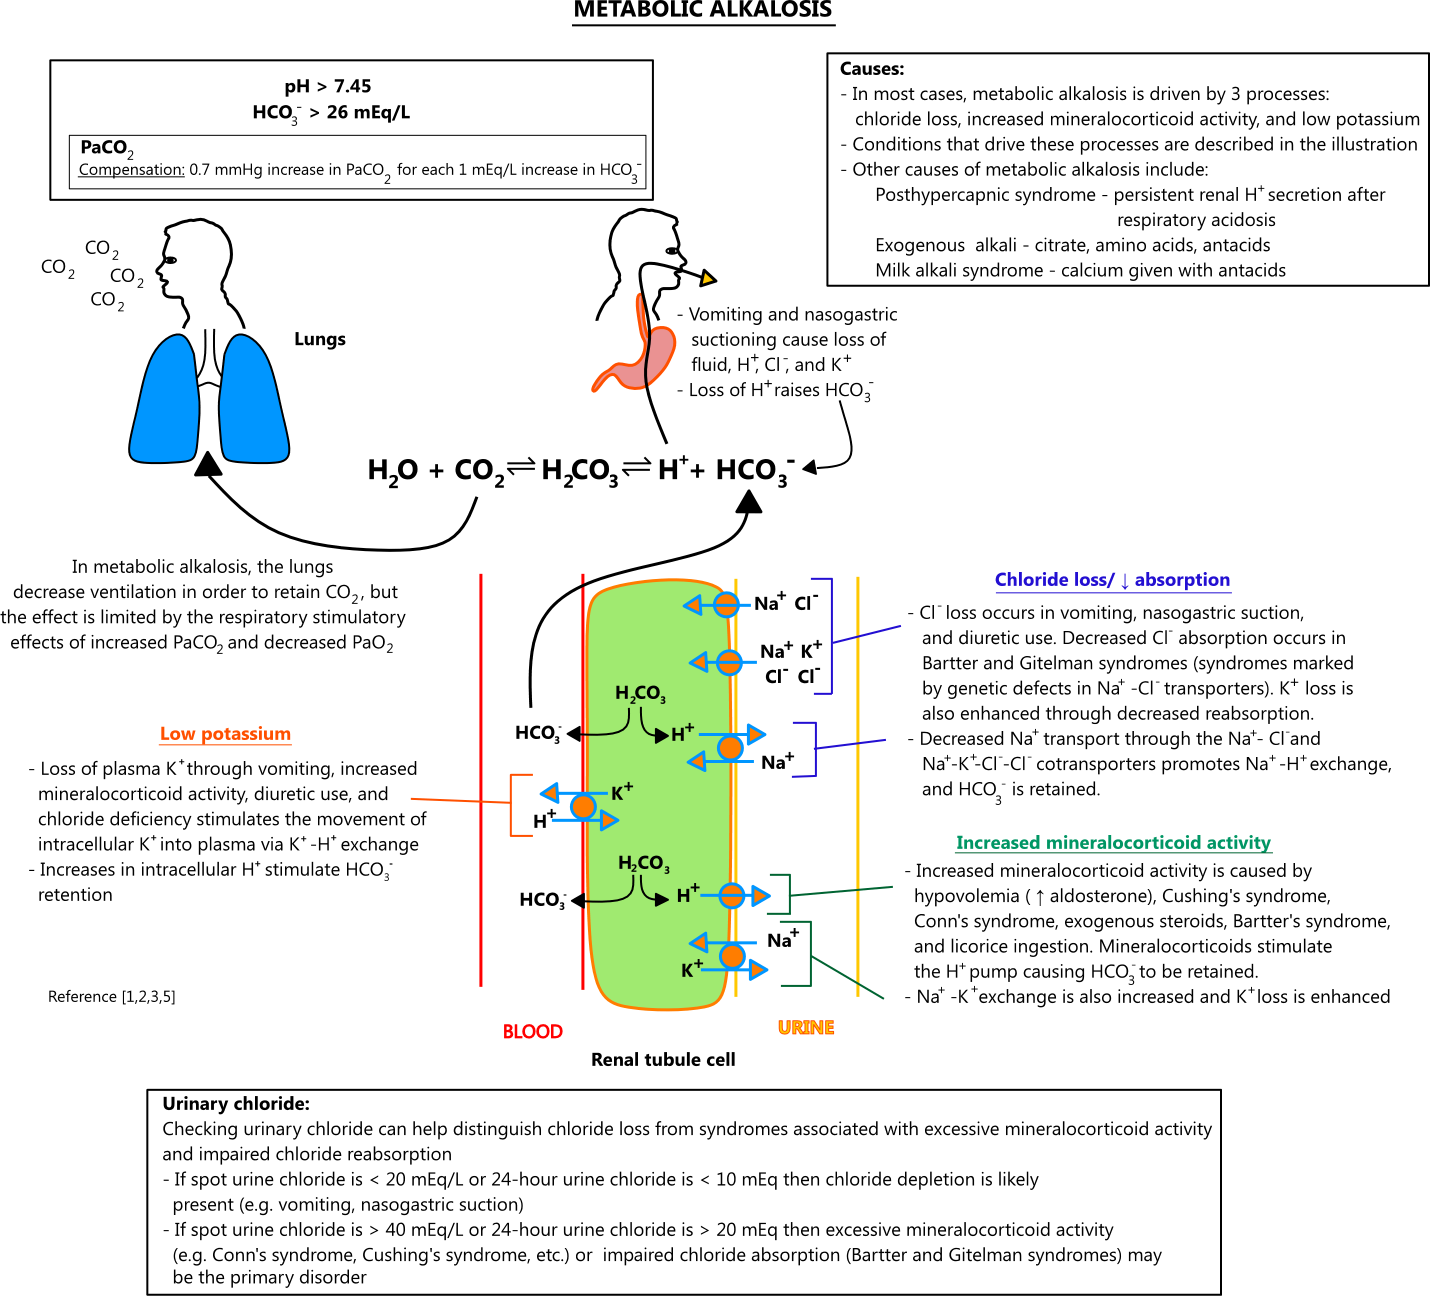 Illustration of metabolic alkalosis, including causes, laboratory and blood gas findings, Bartter syndrome, Gitelman syndrome, and renal pathology